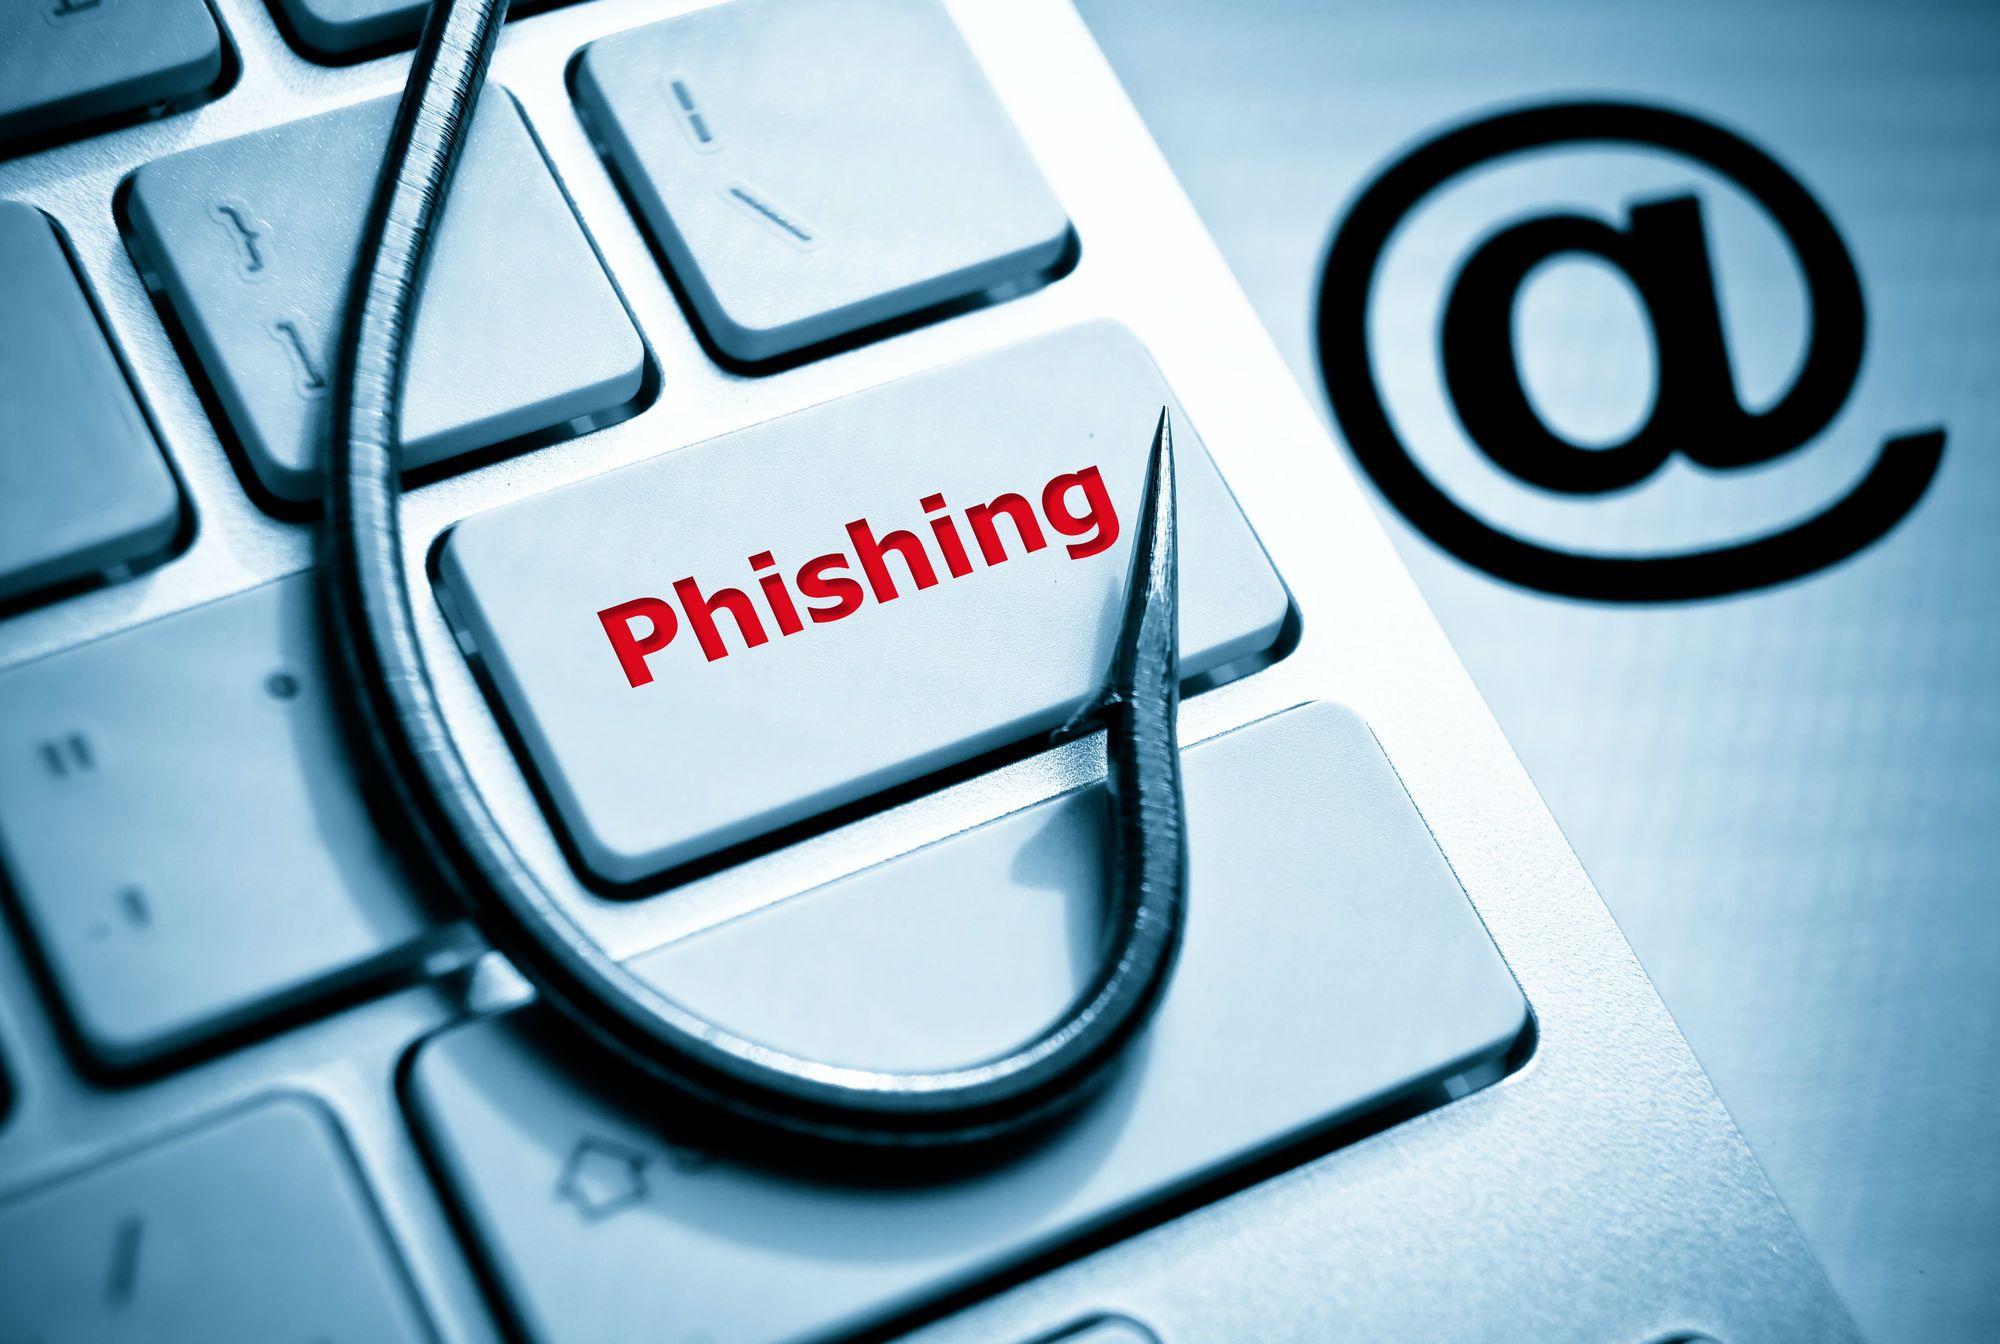 A fishing hook lies on top of a "phishing" key on computer keyboard, which sits next to an @ symbol - golden entertainment